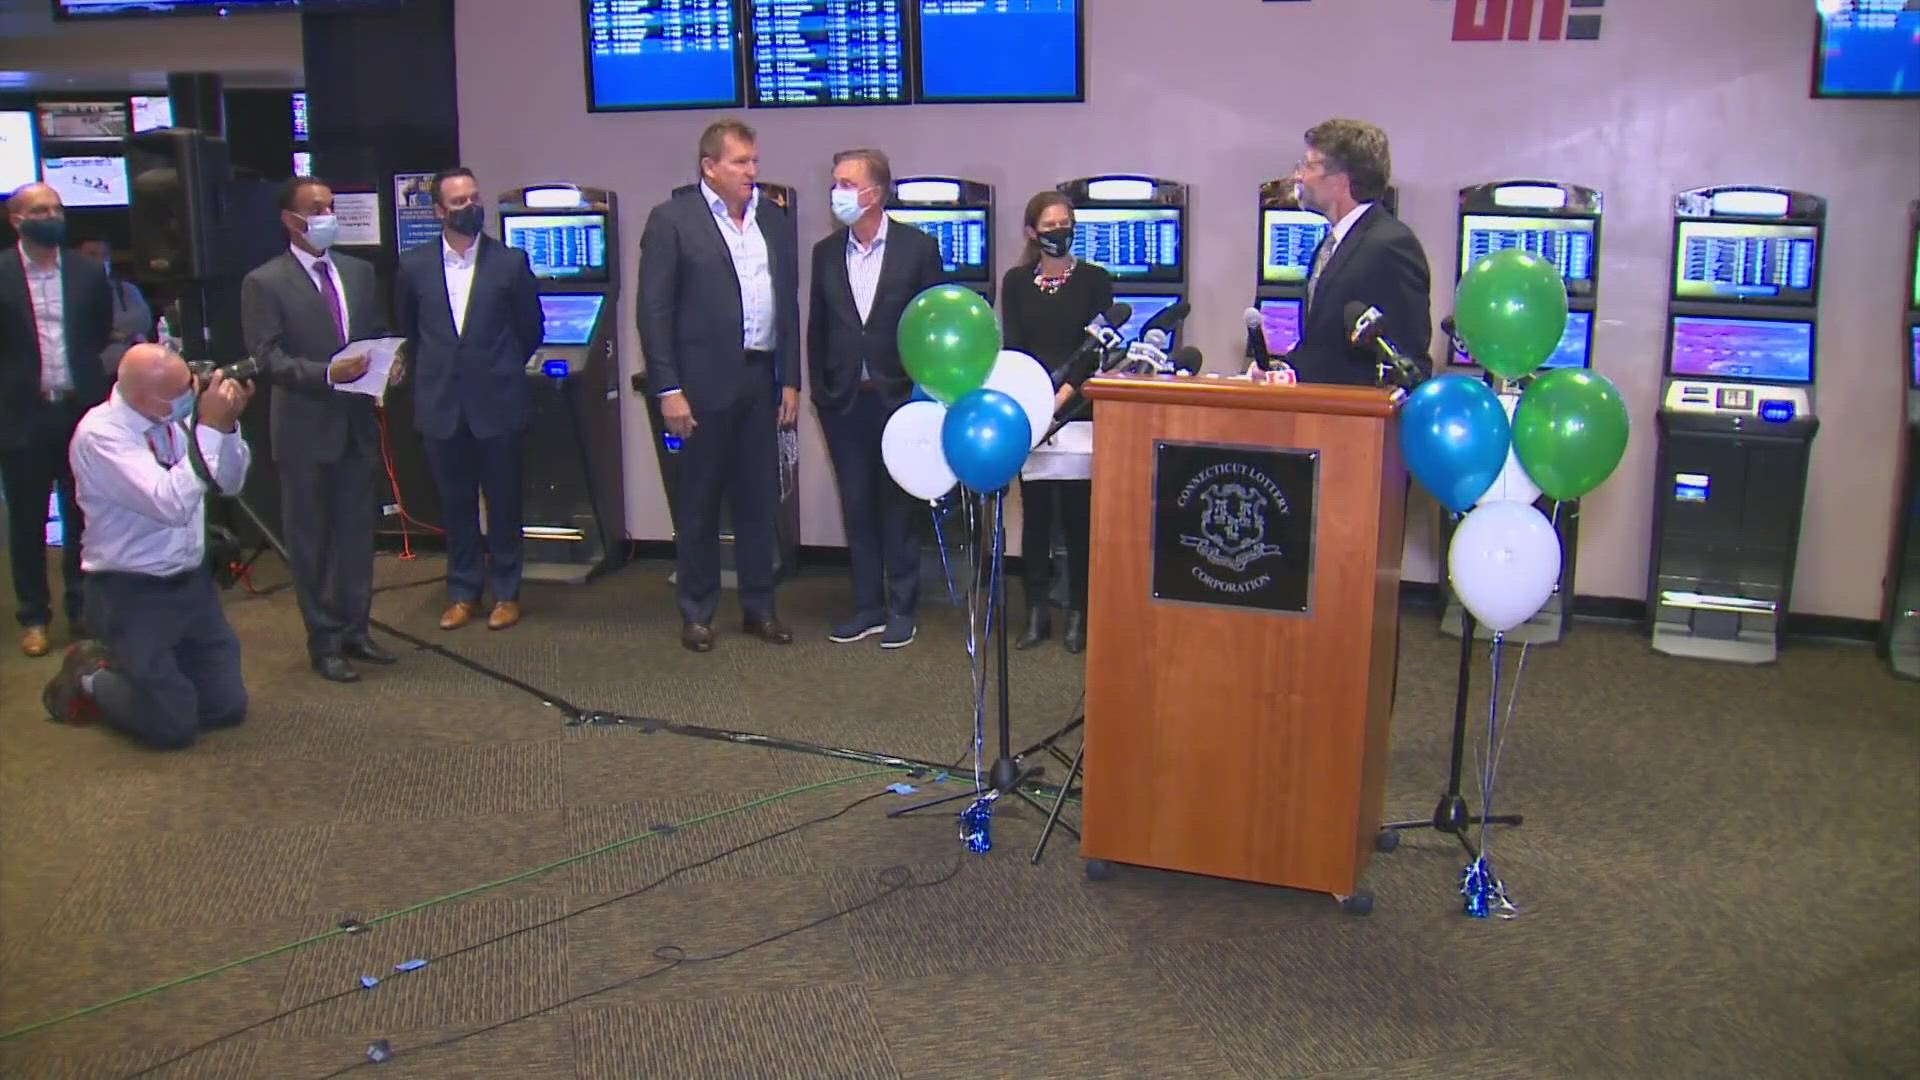 Lamont placed the first bet in the state's new sports betting venture between the Connecticut Lottery and  Rush Street Interactive.